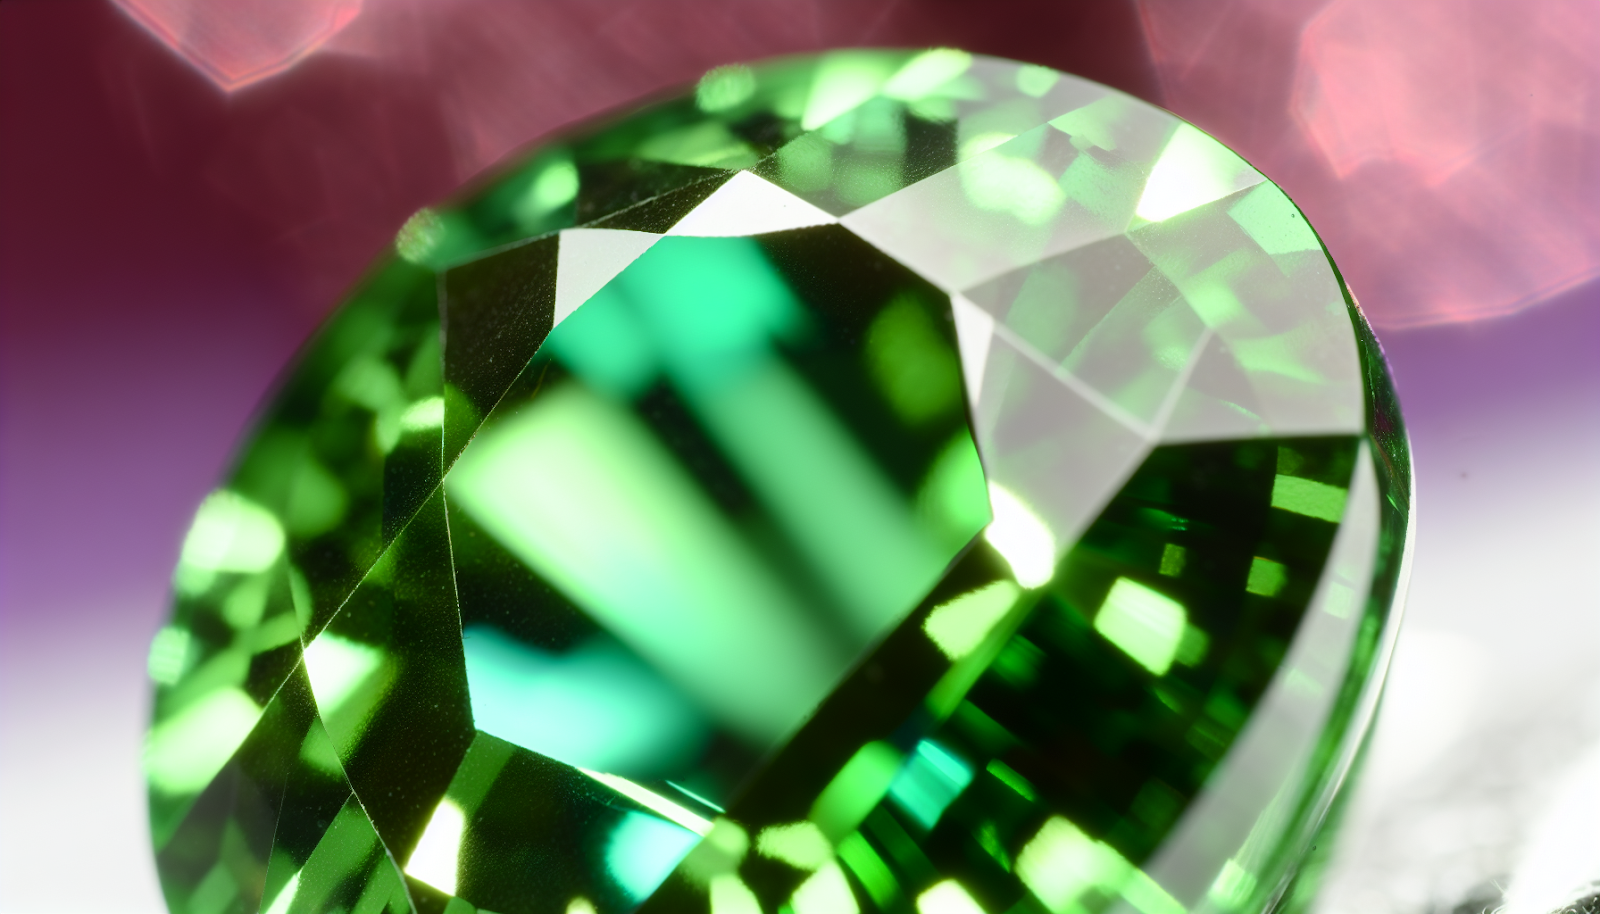 A macro shot of a tsavorite garnet displaying its high index of refraction and vibrant green color